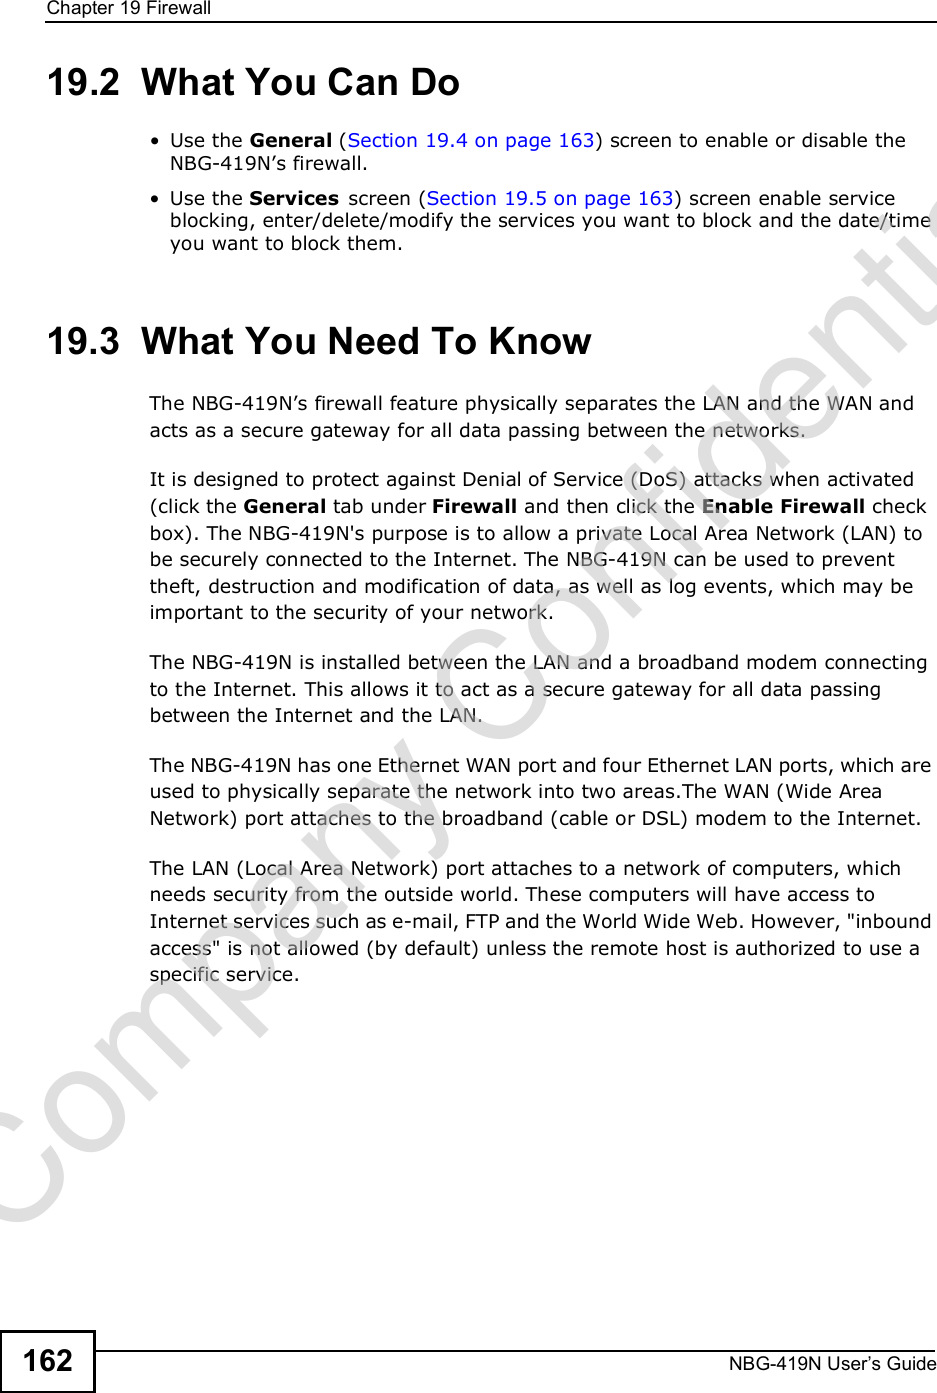 Chapter 19FirewallNBG-419N User s Guide16219.2  What You Can Do Use the General (Section 19.4 on page 163) screen to enable or disable the NBG-419N!s firewall. Use the Services screen (Section 19.5 on page 163) screen enable service blocking, enter/delete/modify the services you want to block and the date/time you want to block them. 19.3  What You Need To KnowThe NBG-419N!s firewall feature physically separates the LAN and the WAN and acts as a secure gateway for all data passing between the networks.It is designed to protect against Denial of Service (DoS) attacks when activated (click the General tab under Firewall and then click the Enable Firewall check box). The NBG-419N&apos;s purpose is to allow a private Local Area Network (LAN) to be securely connected to the Internet. The NBG-419N can be used to prevent theft, destruction and modification of data, as well as log events, which may be important to the security of your network. The NBG-419N is installed between the LAN and a broadband modem connecting to the Internet. This allows it to act as a secure gateway for all data passing between the Internet and the LAN.The NBG-419N has one Ethernet WAN port and four Ethernet LAN ports, which are used to physically separate the network into two areas.The WAN (Wide Area Network) port attaches to the broadband (cable or DSL) modem to the Internet.The LAN (Local Area Network) port attaches to a network of computers, which needs security from the outside world. These computers will have access to Internet services such as e-mail, FTP and the World Wide Web. However, &quot;inbound access&quot; is not allowed (by default) unless the remote host is authorized to use a specific service.Company Confidential